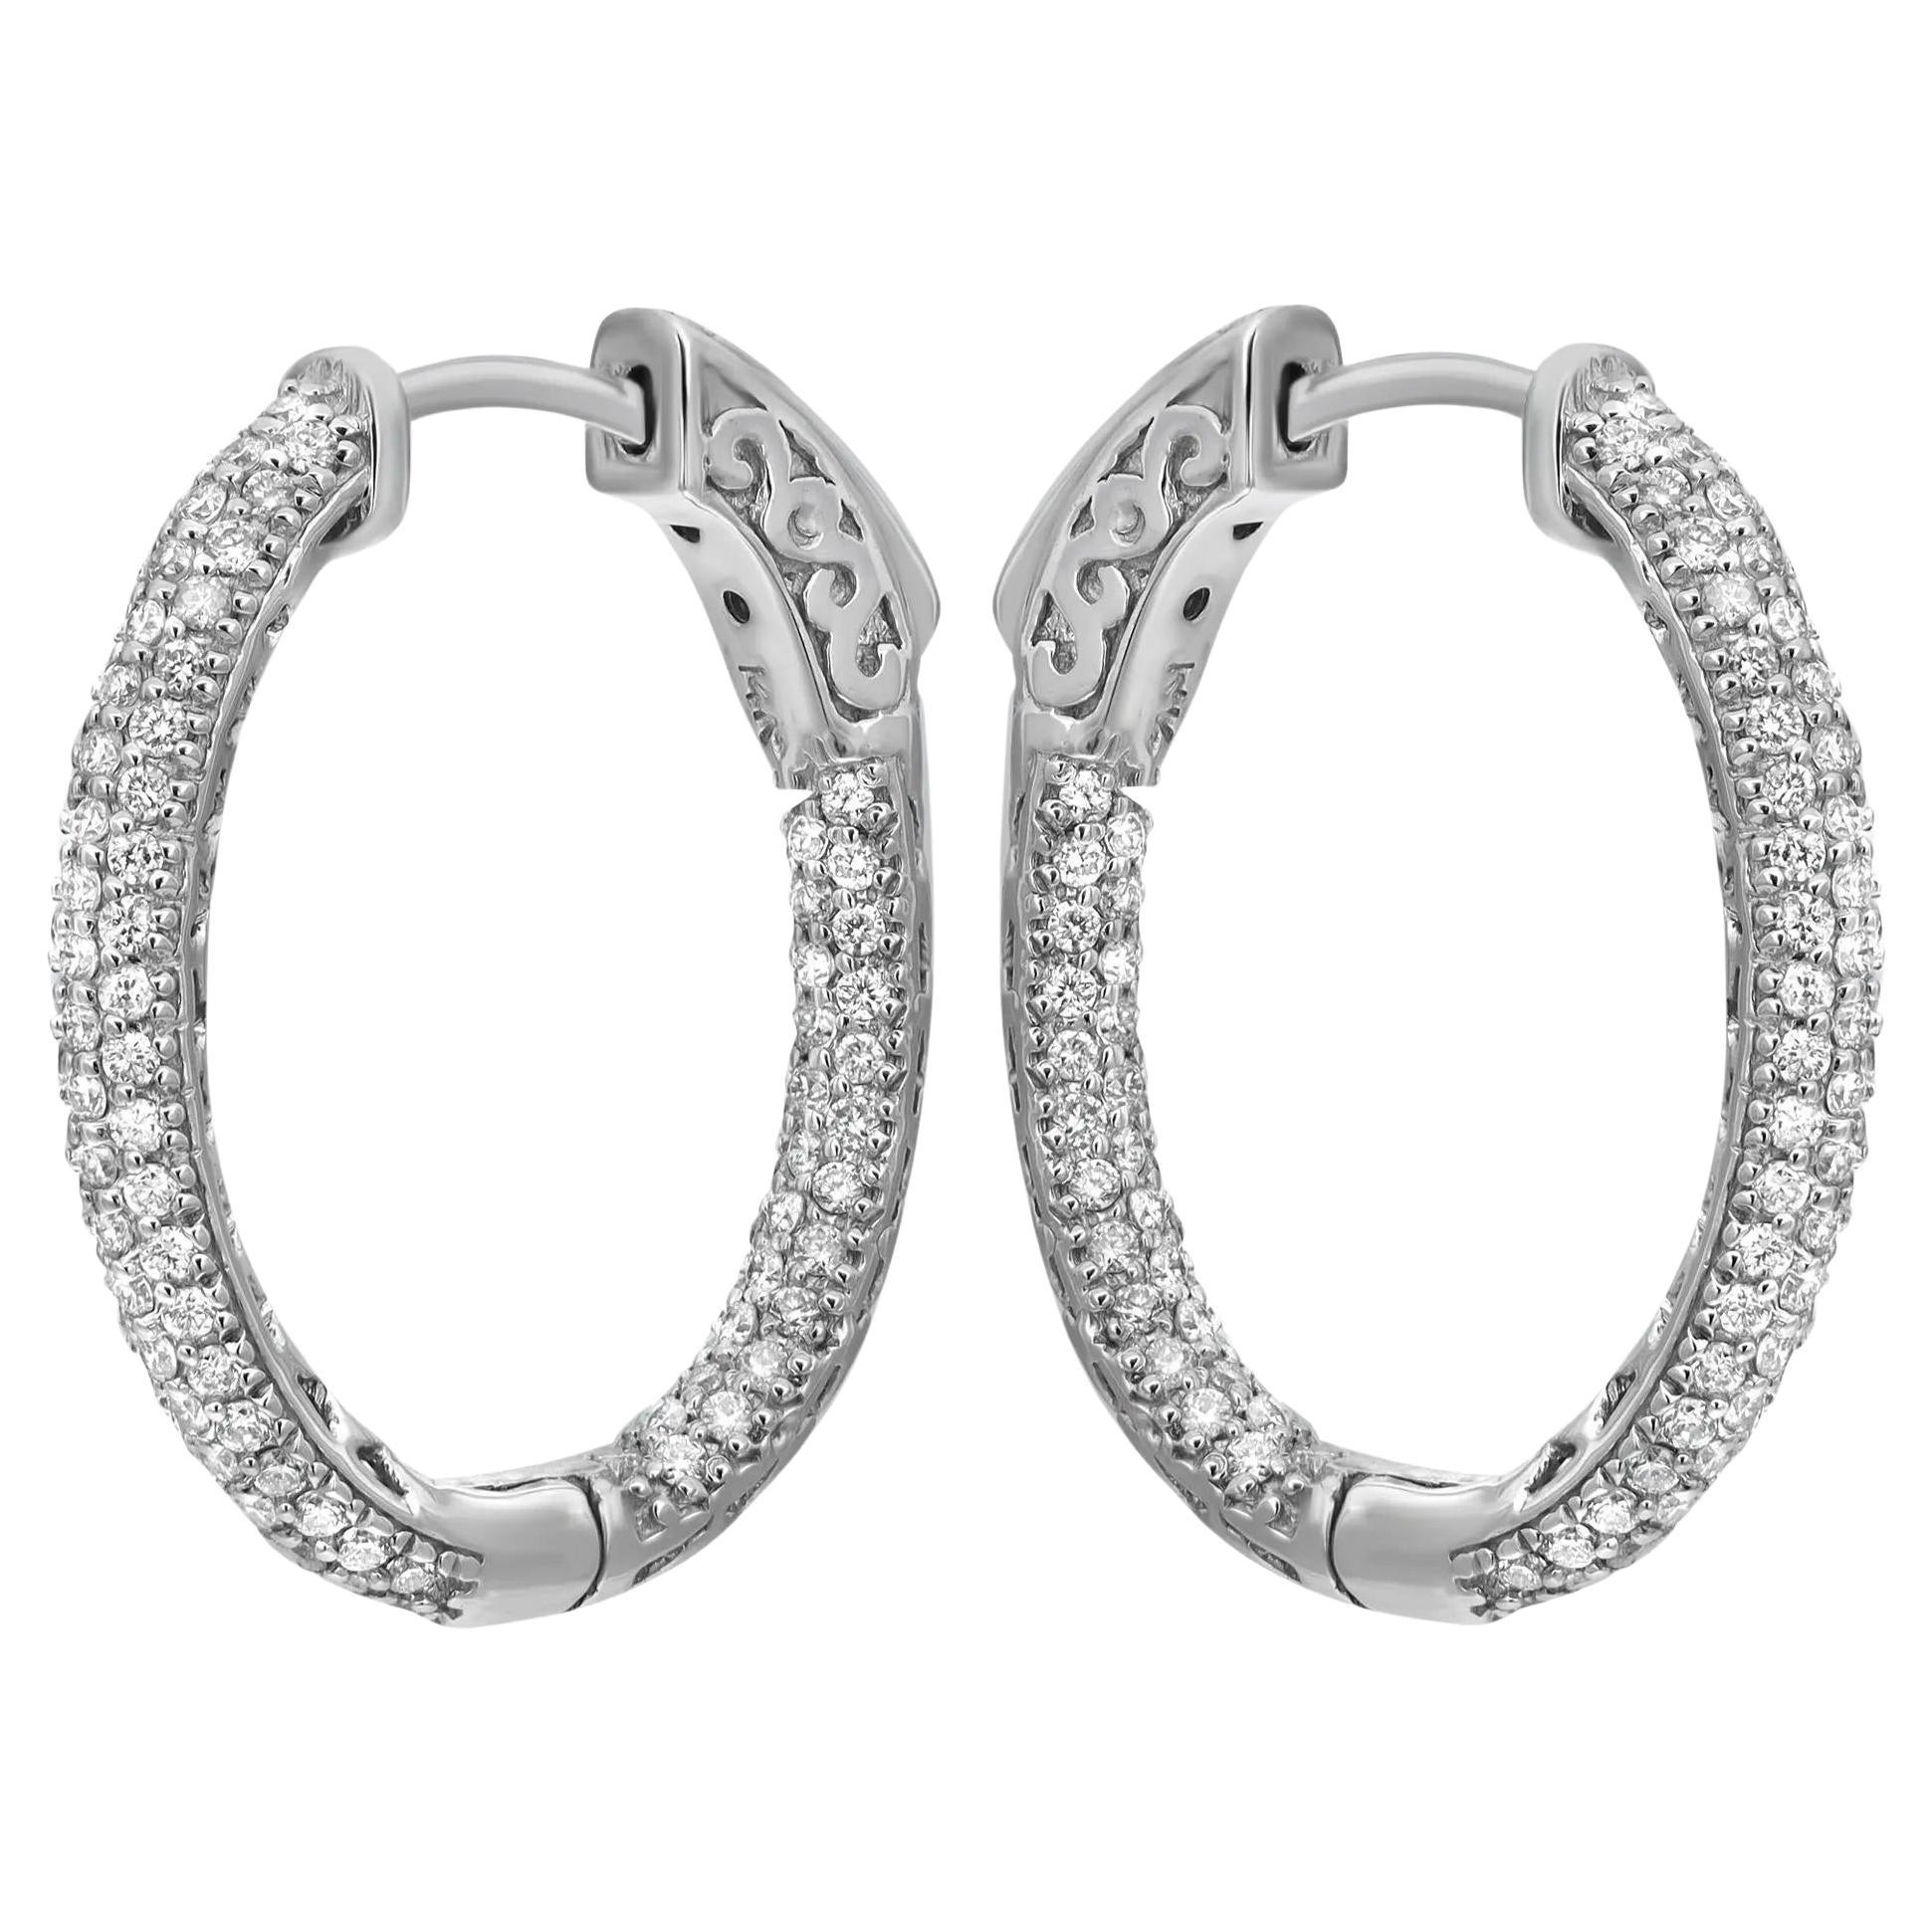 Pave Set Round Cut Diamond Oval Hoop Earrings 14K White Gold 1.00Cttw 1 Inch For Sale